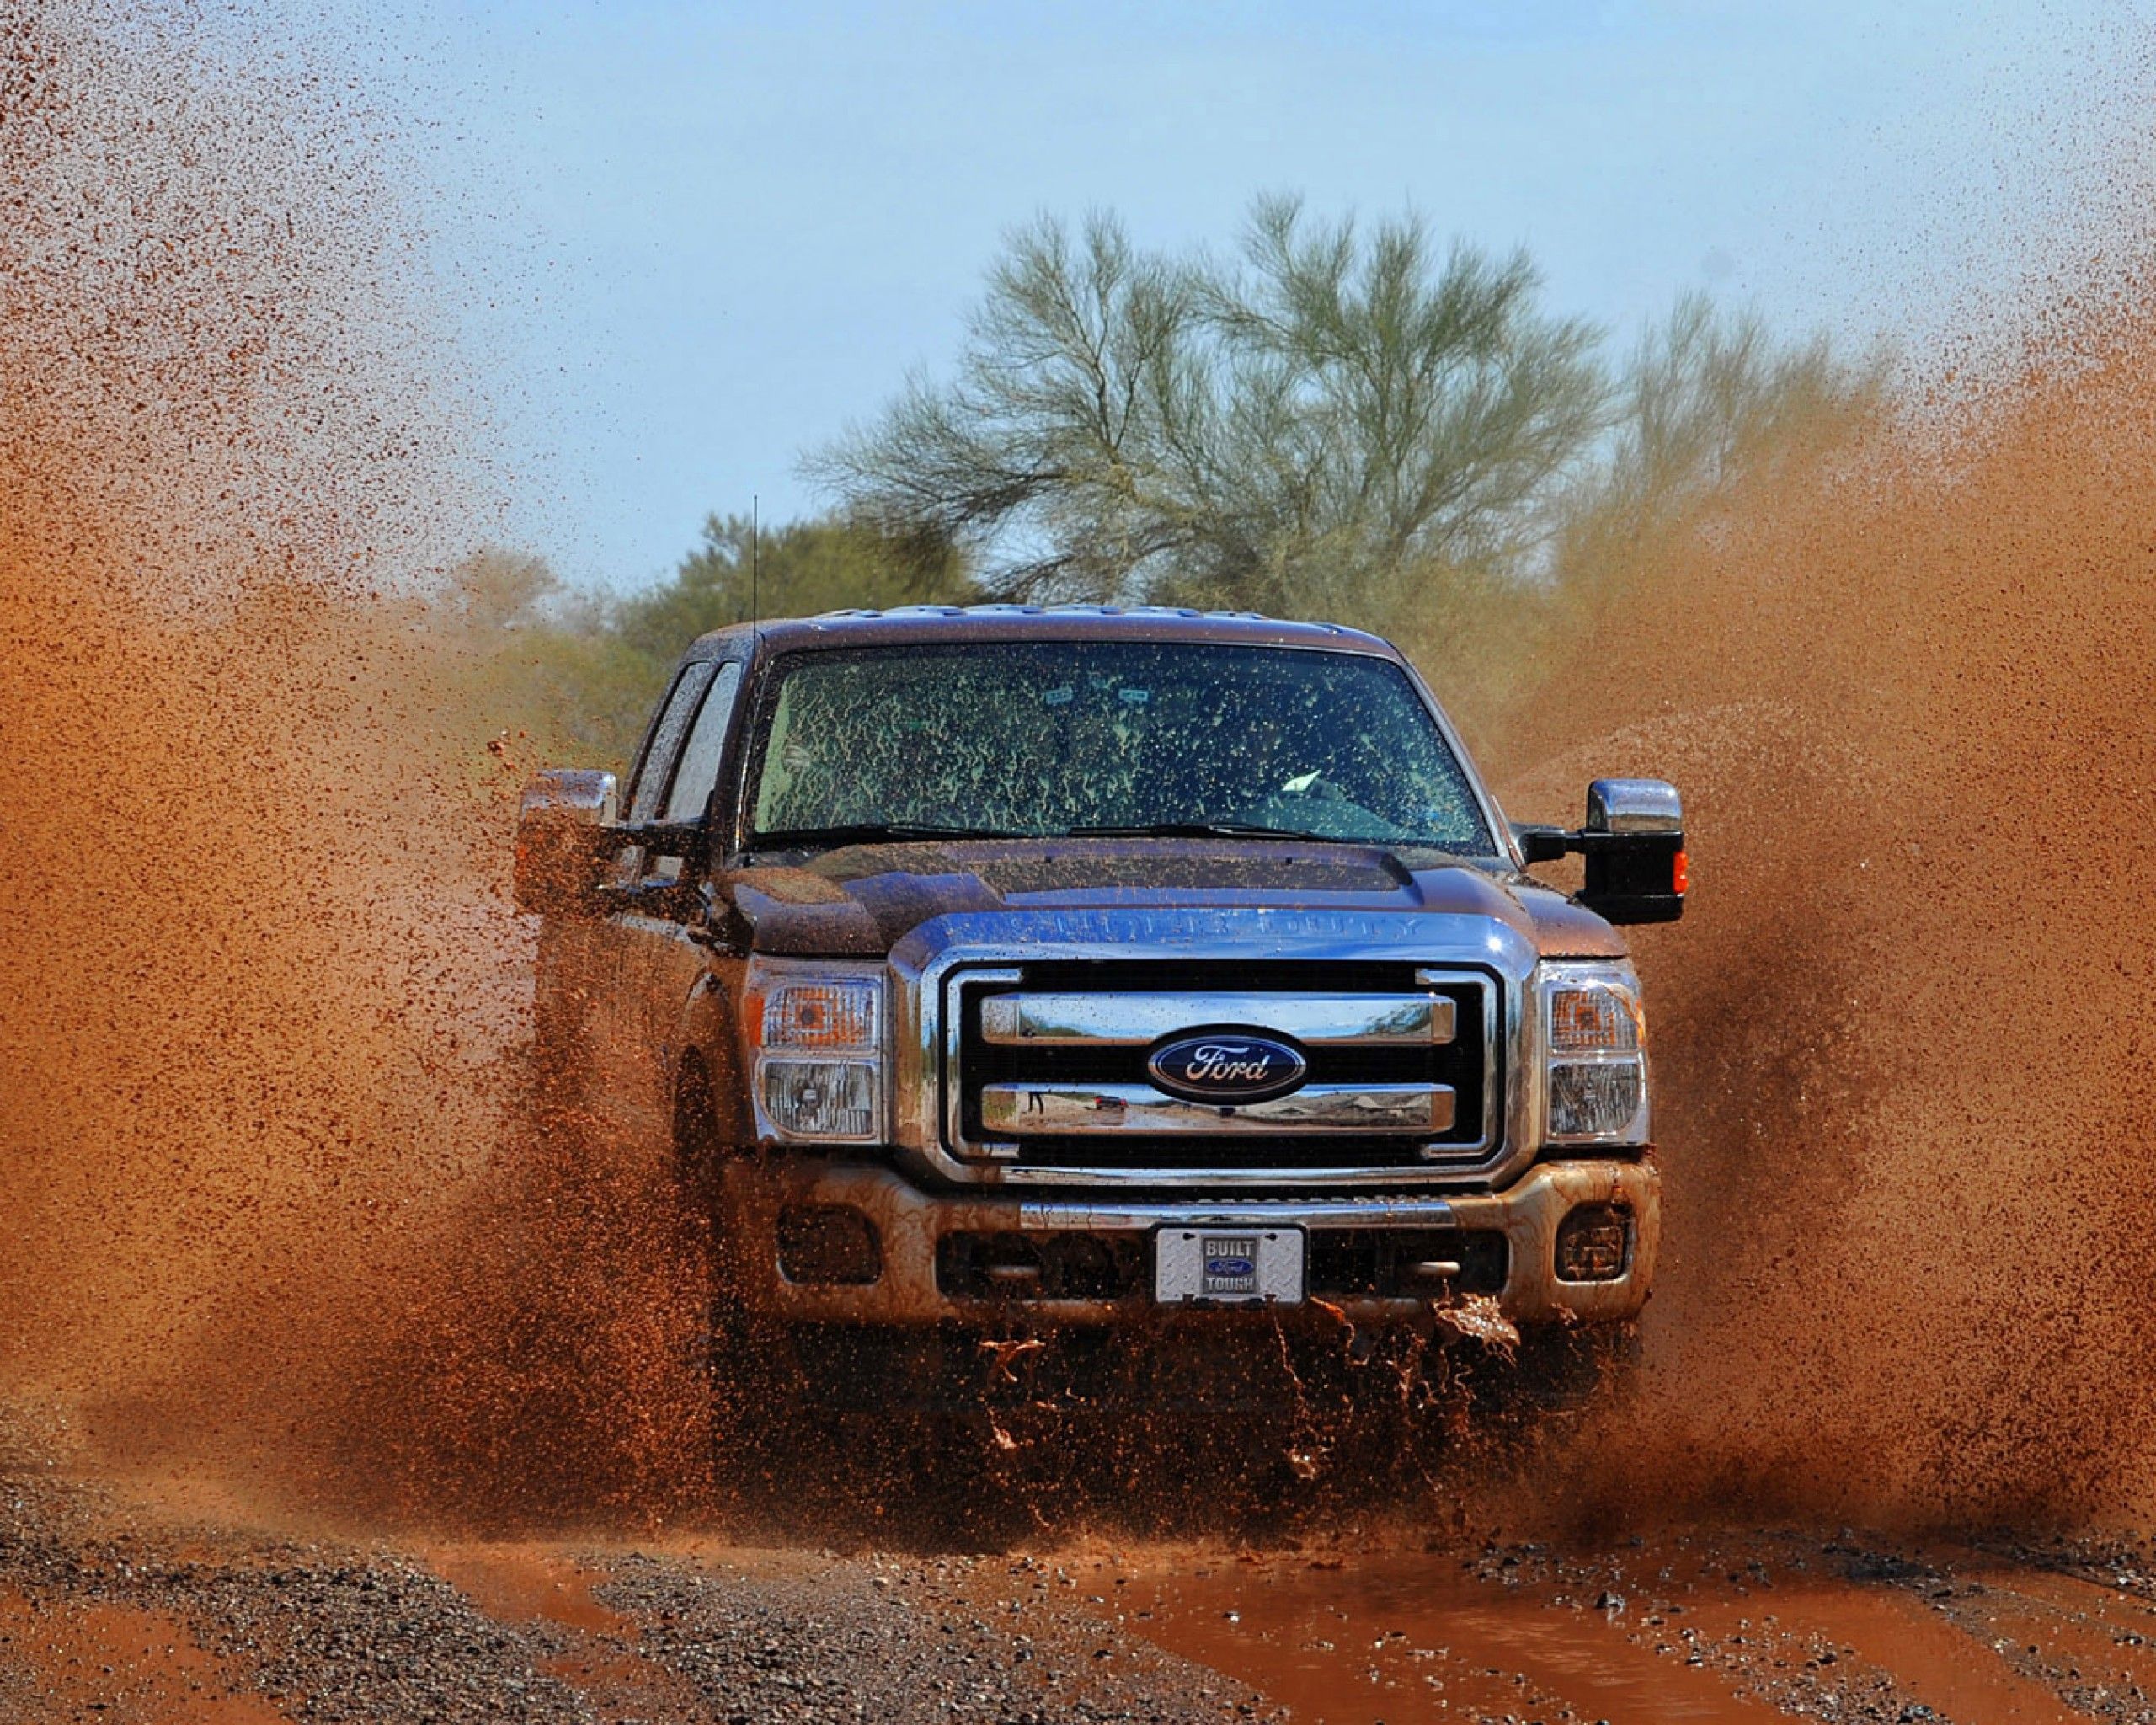 Ford F-250 Wallpapers